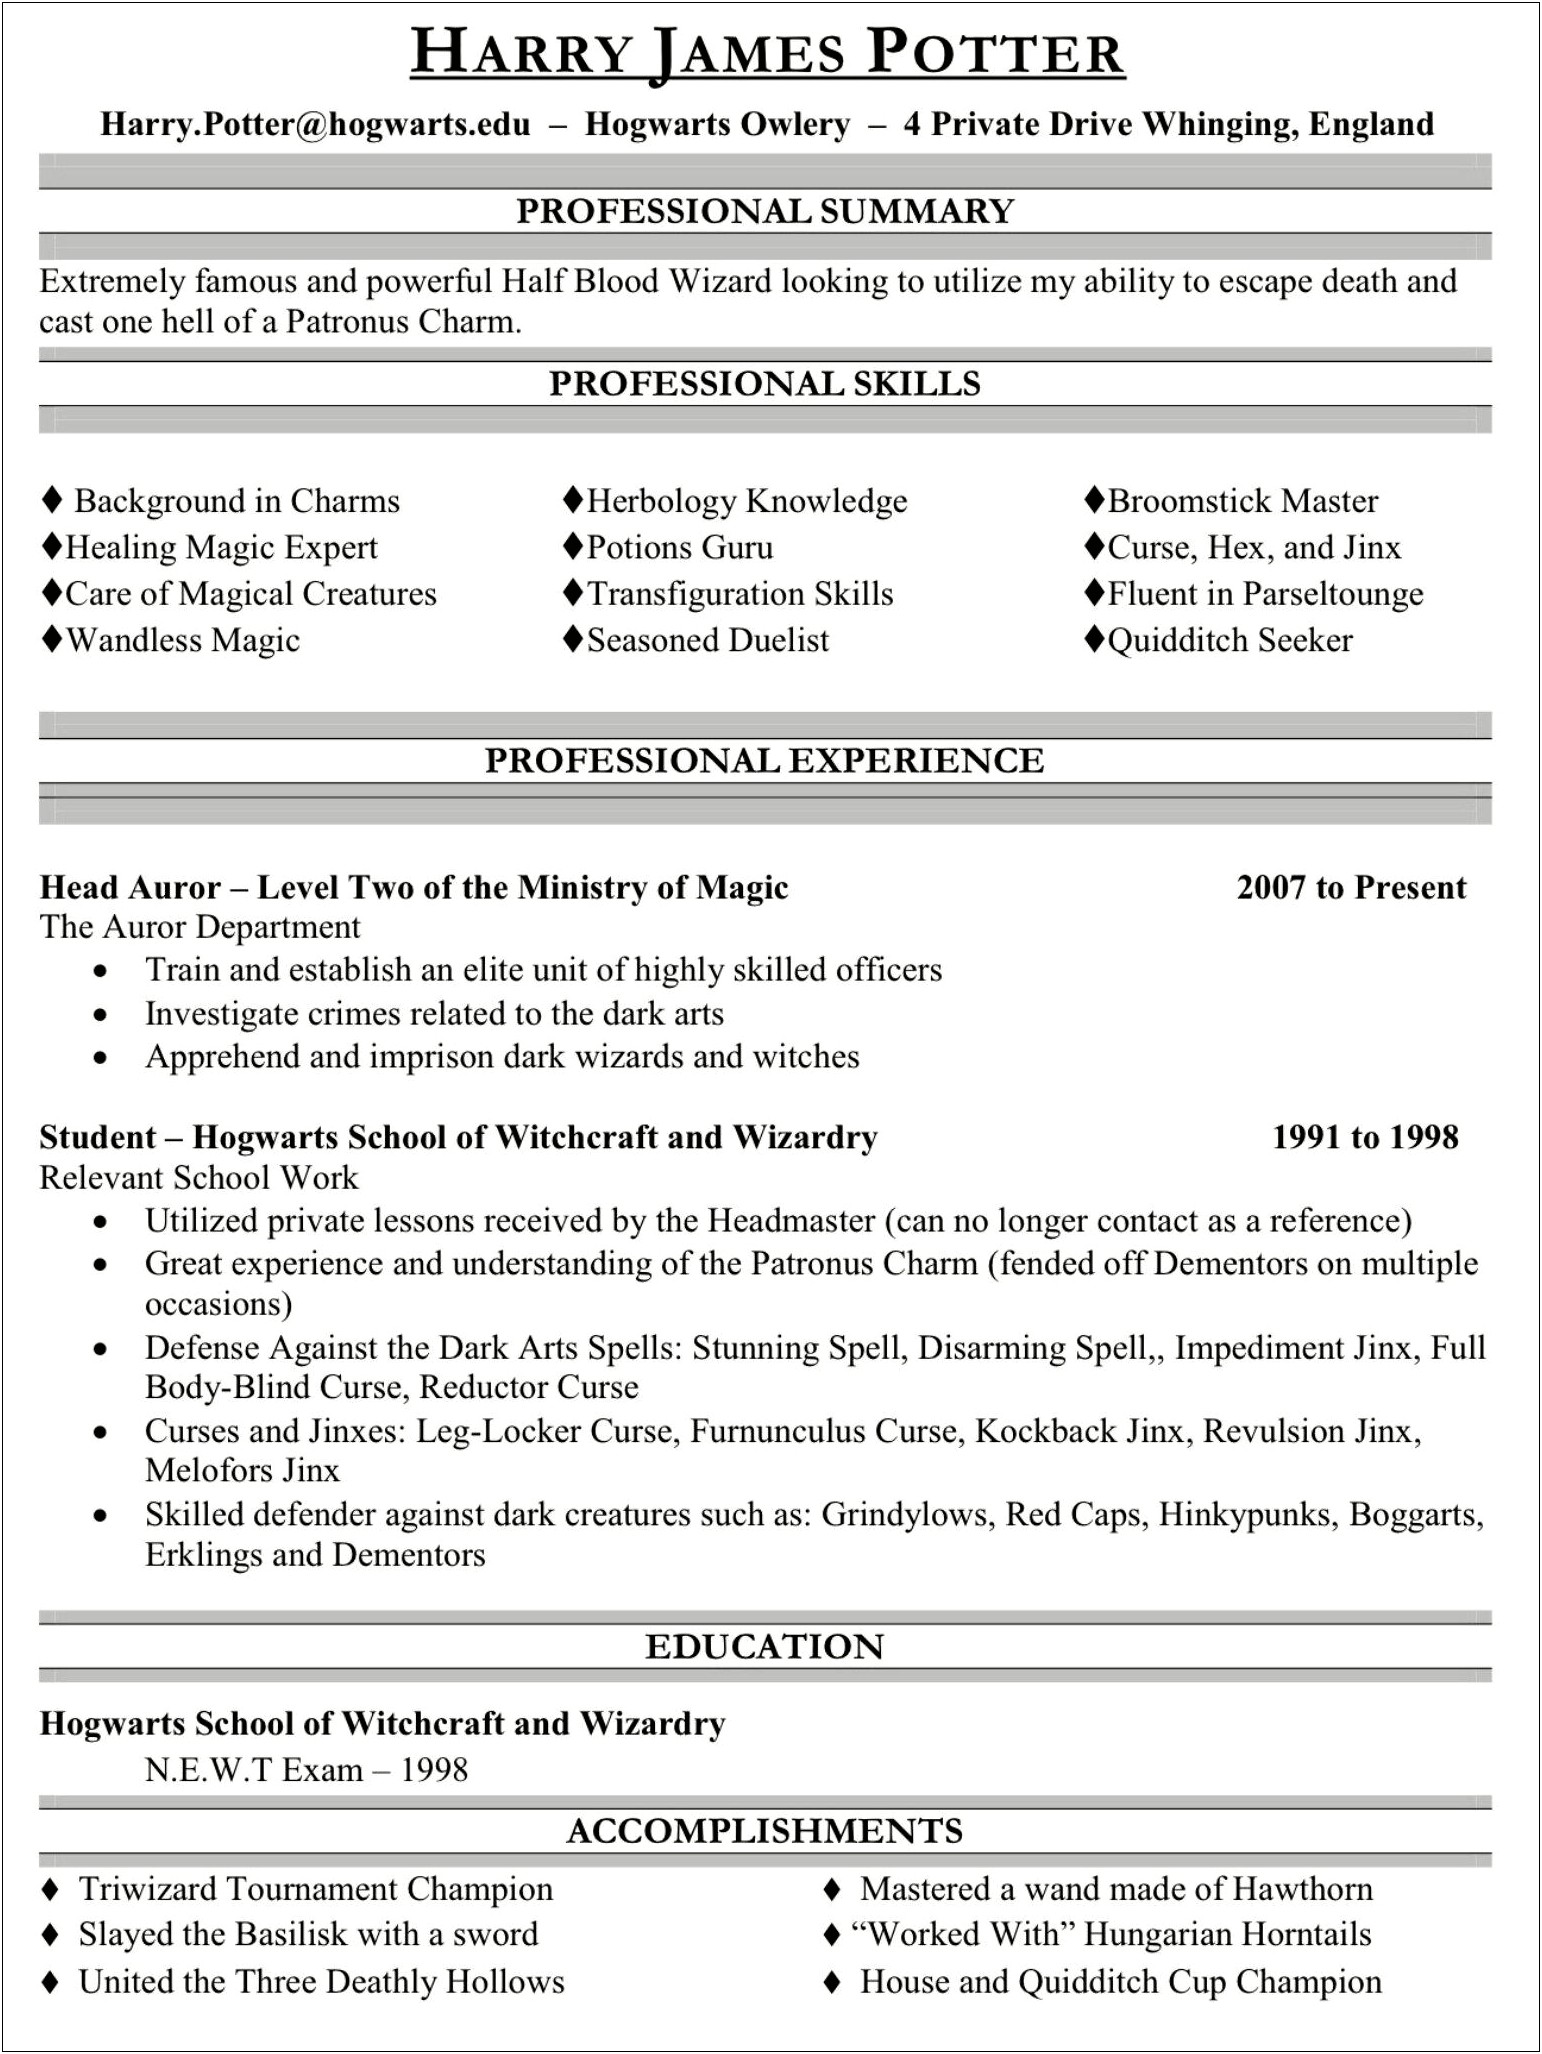 Formating The Profesional Experience In Resume